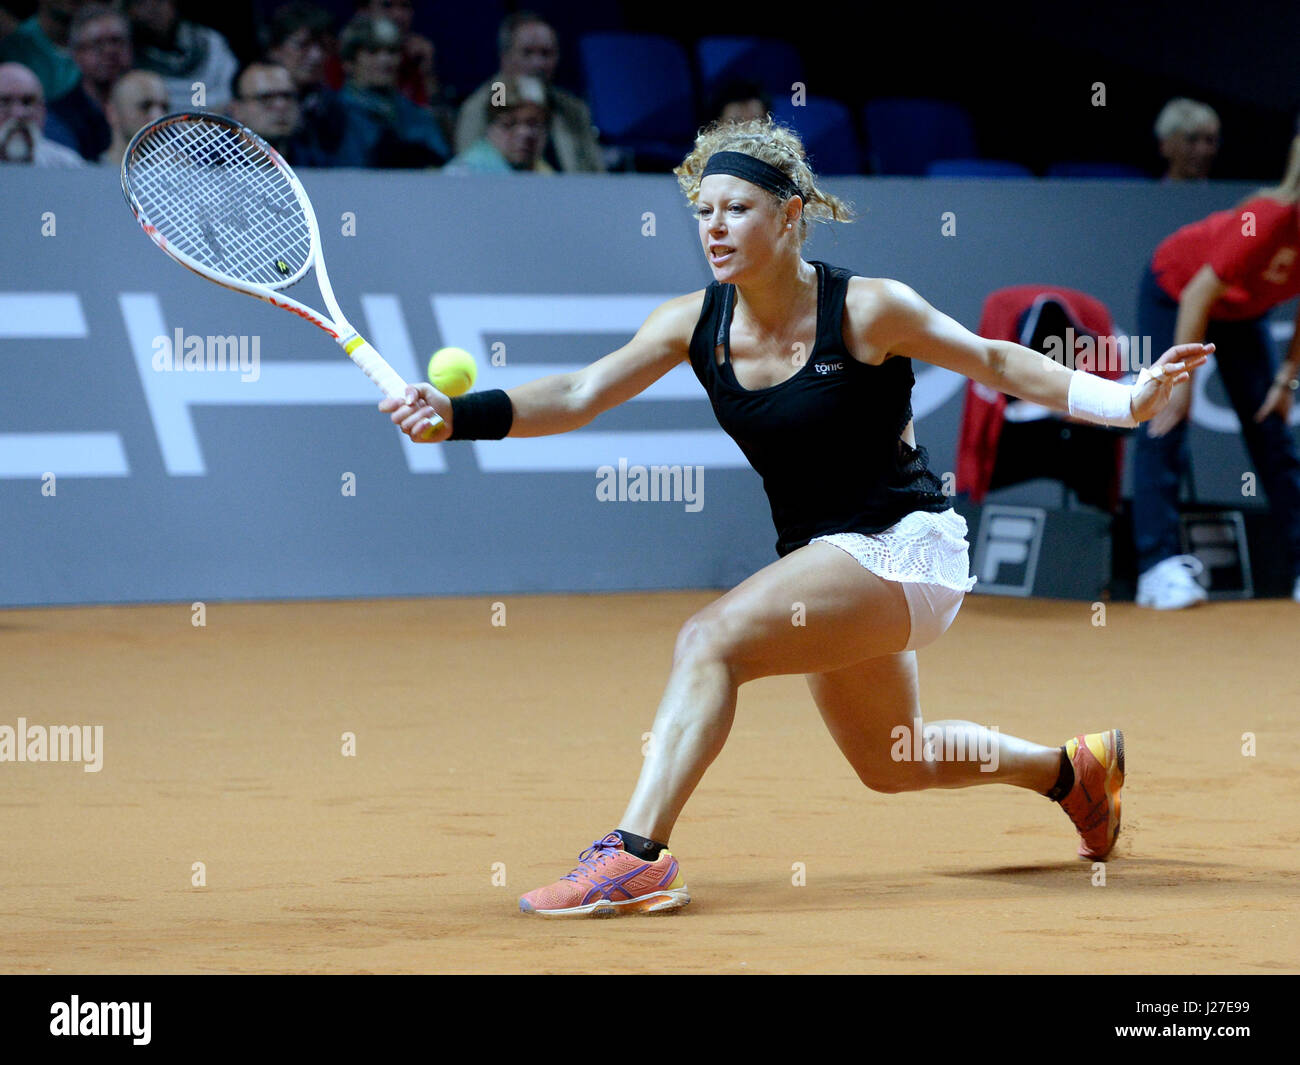 Stuttgart, Germany. 25th Apr, 2017. German tennis player Laura Siegemund  cheers a point against Zhang Shuai from China in the women's single match  of the WTA Tour in the Porsche Arena in